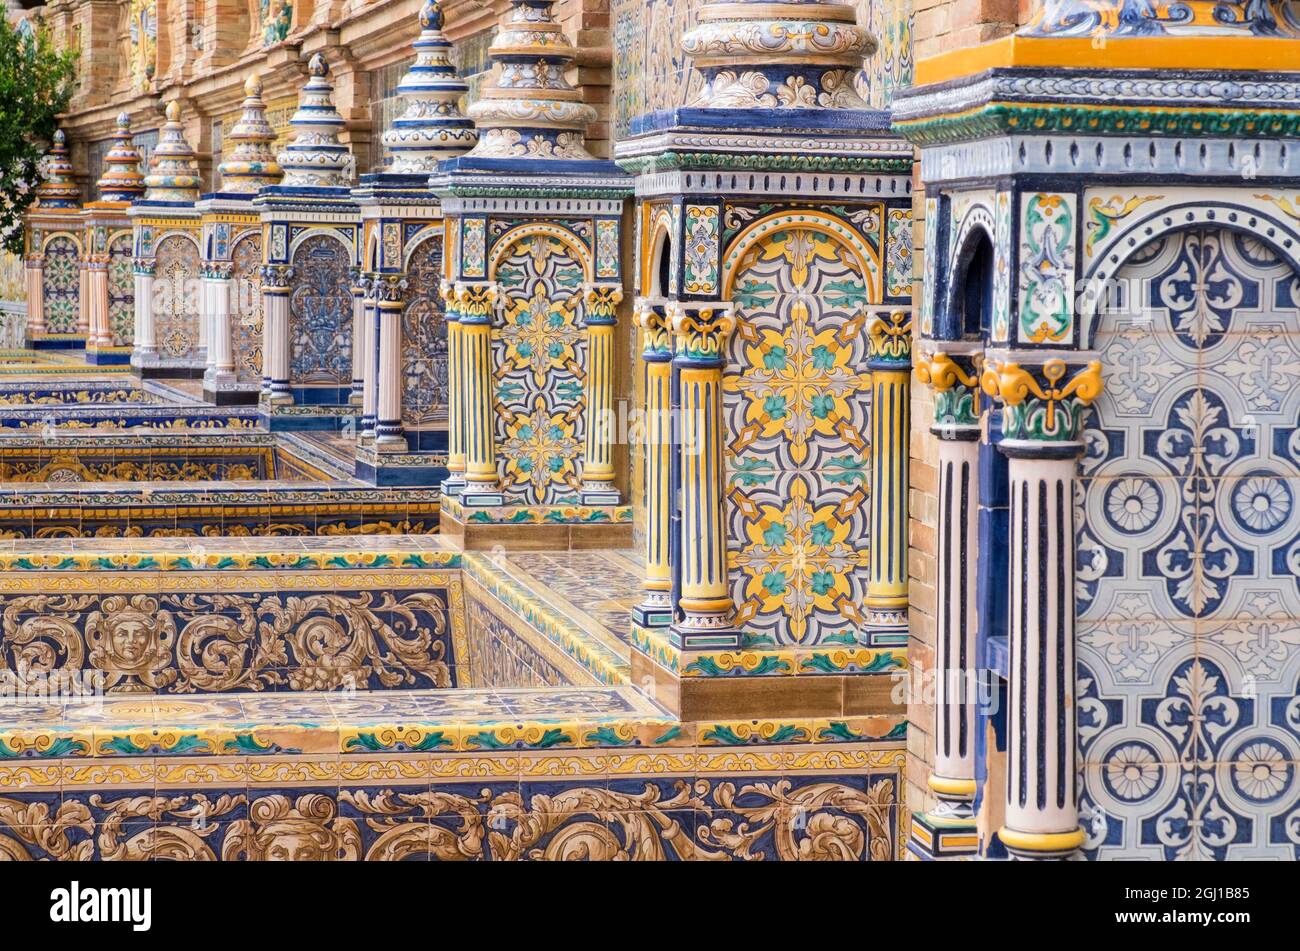 Spain, Andalusia, Seville. The elaborately and traditionally decorated Plaza de Espana, built for the 1929 Ibero-American Exposition. Stock Photo